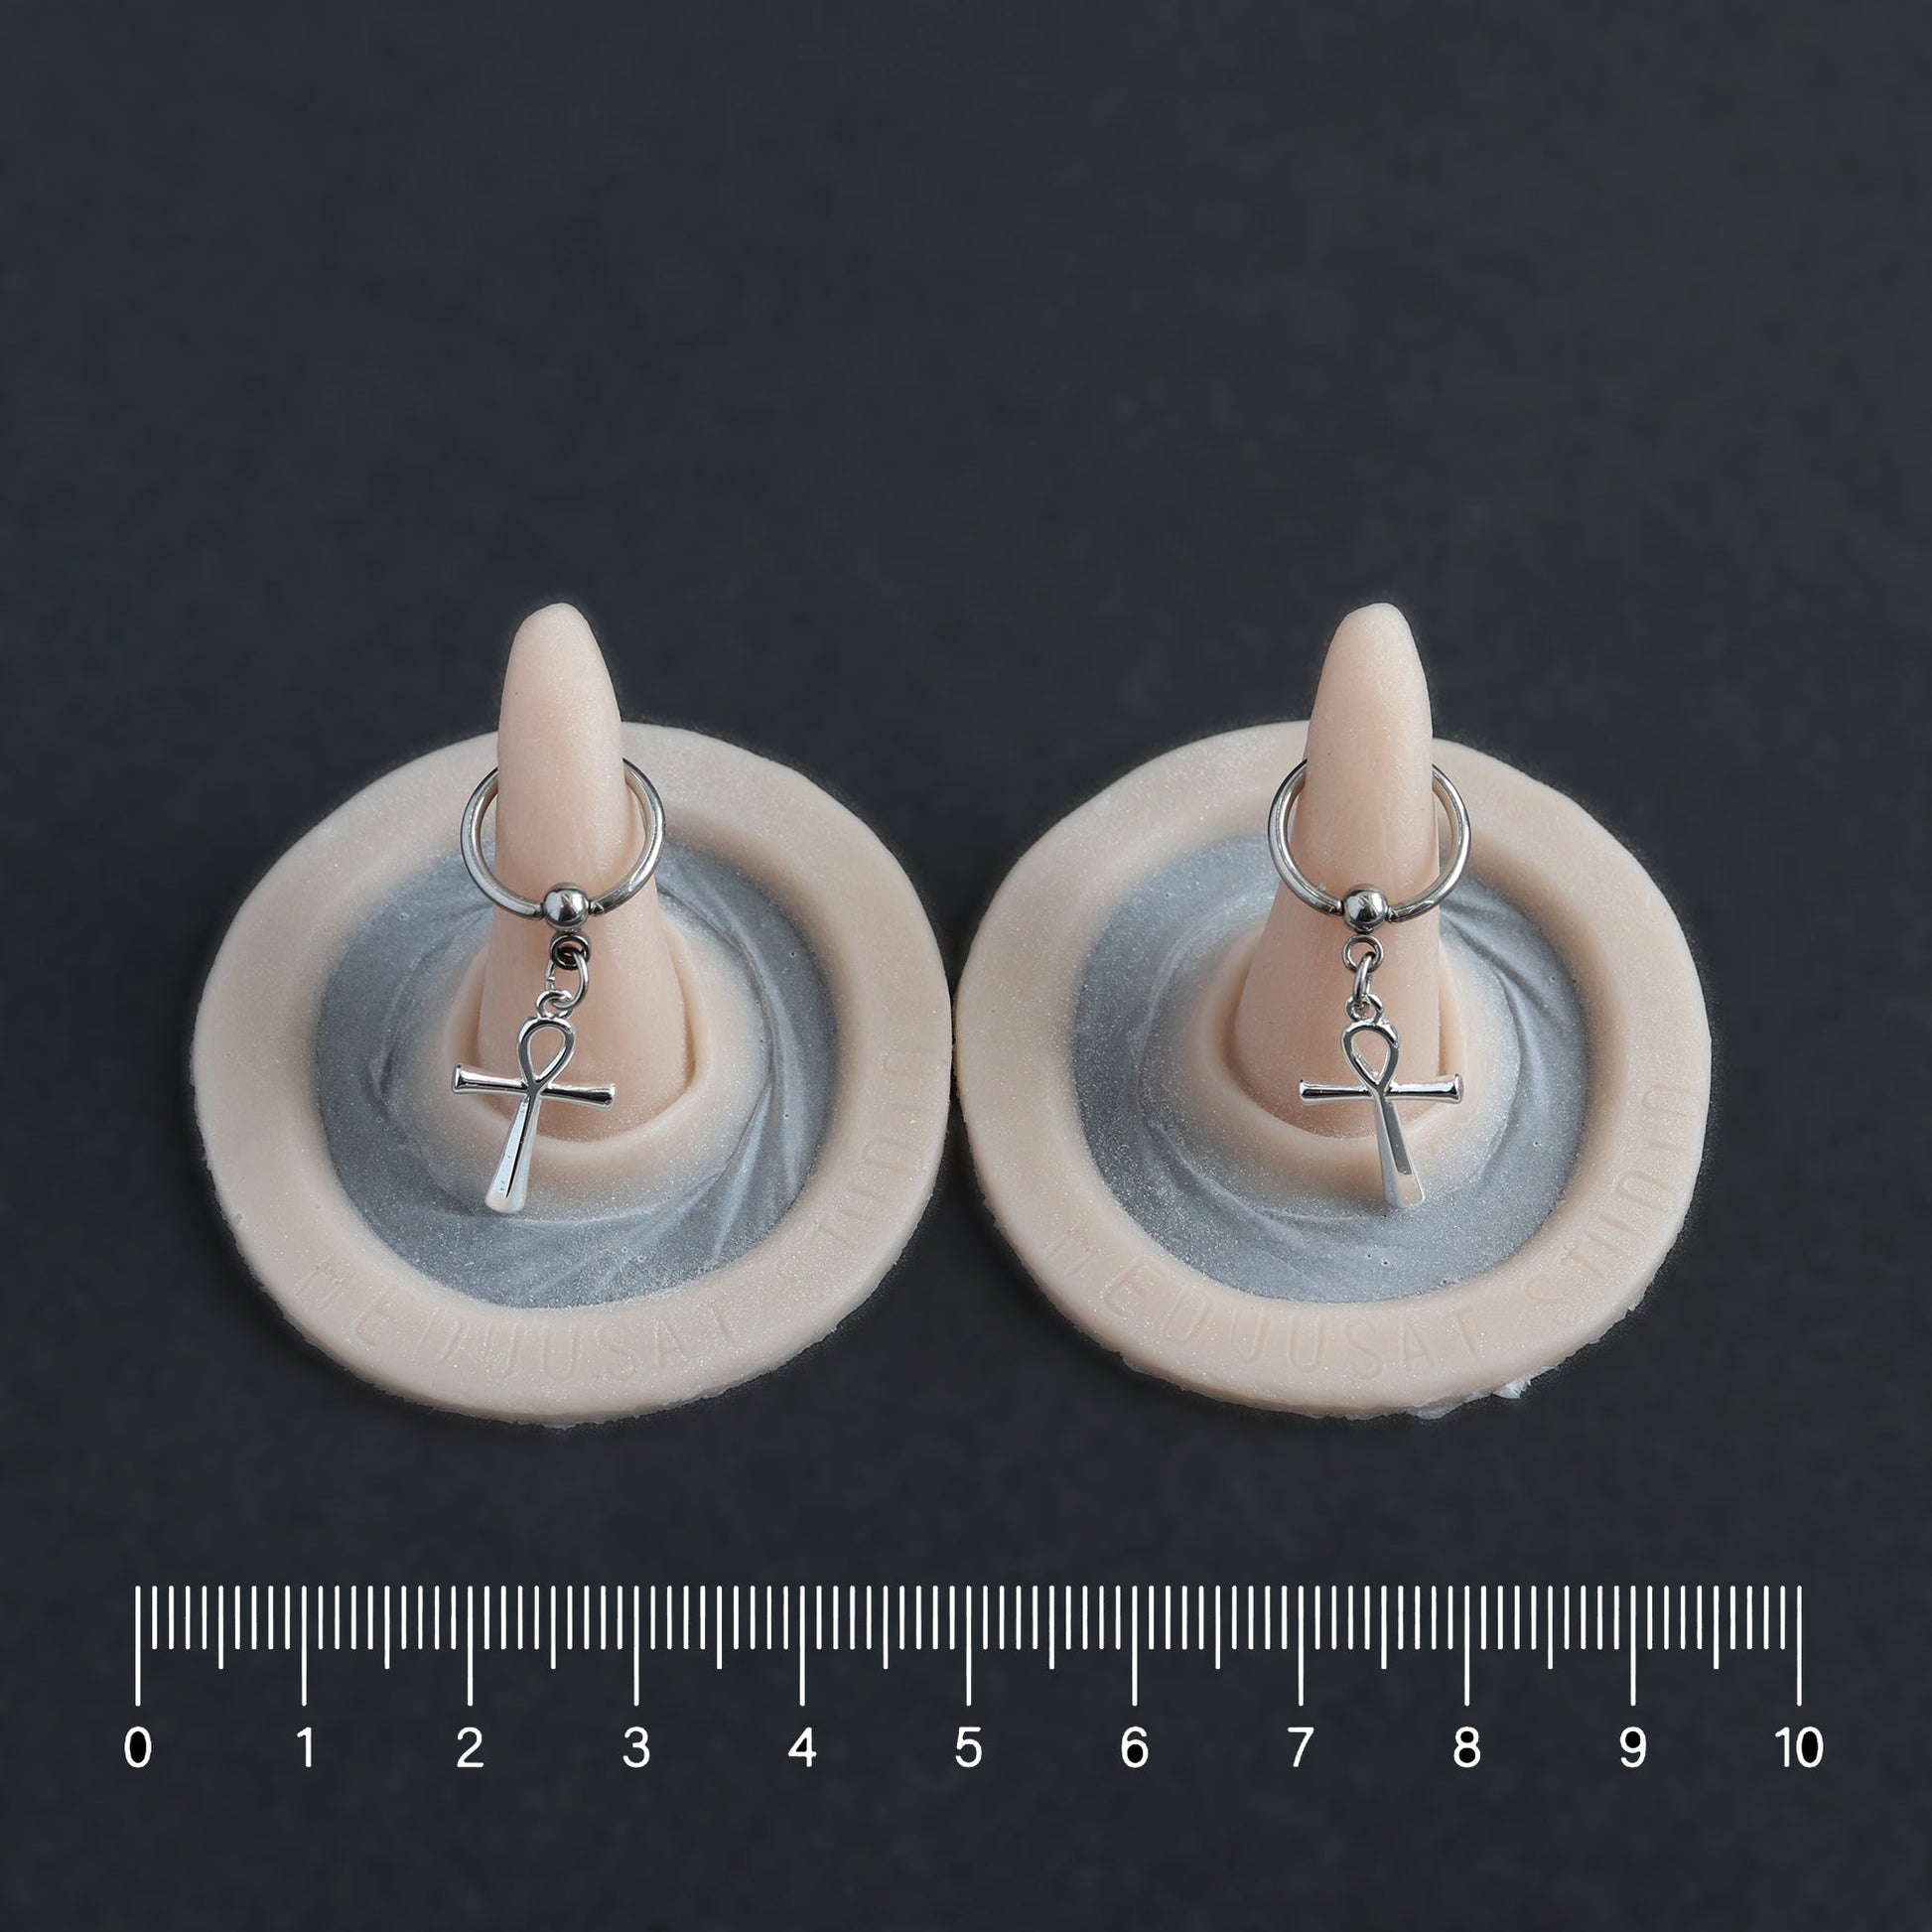 Pierced Horns (Pair) - Silicone makeup prosthetic in vanilla shade on a black surface with a ruler